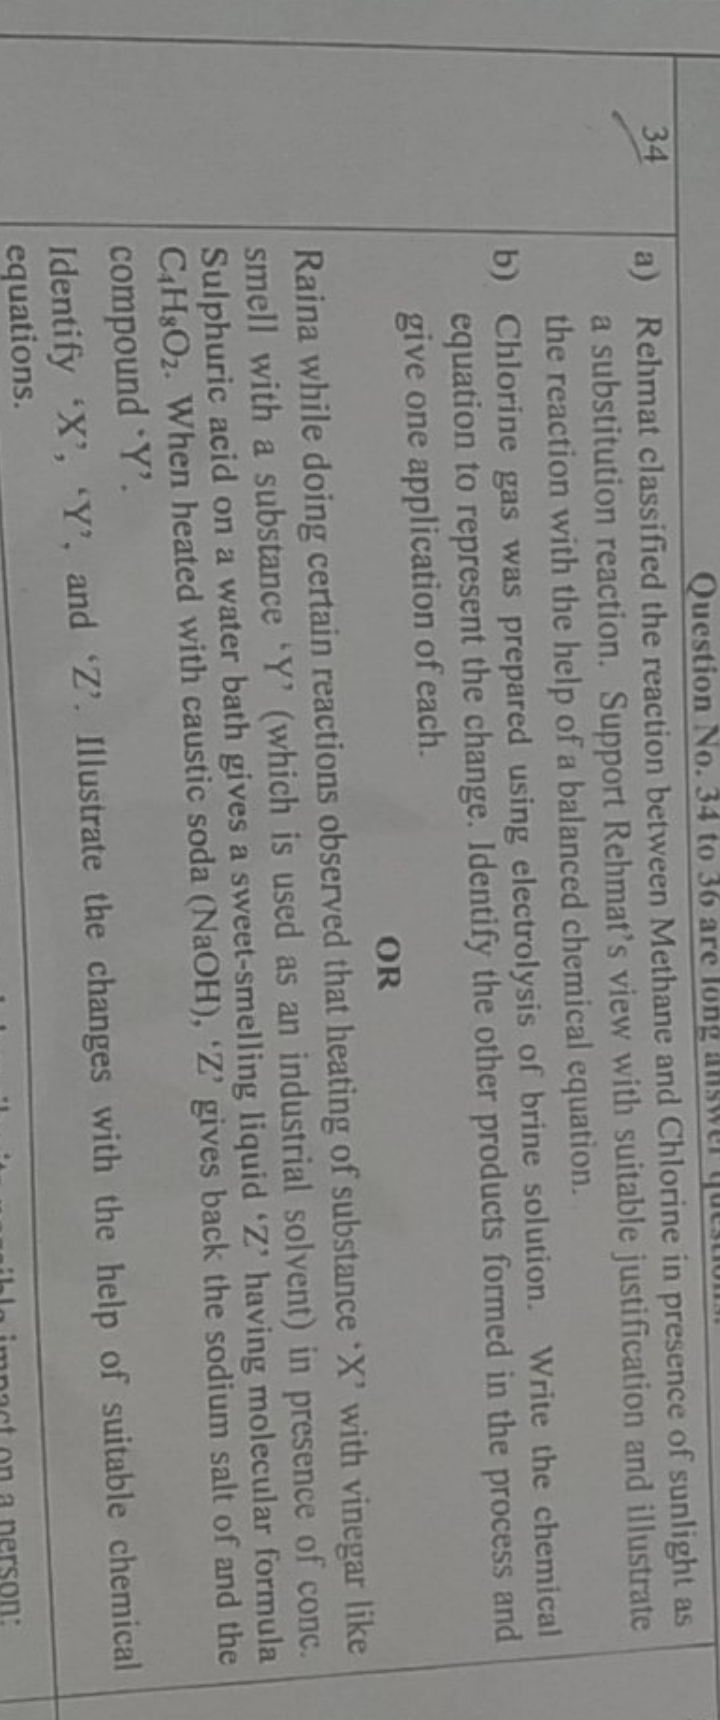 Question No. 34 to 36 are long and Chlorine in presence of sunlight as